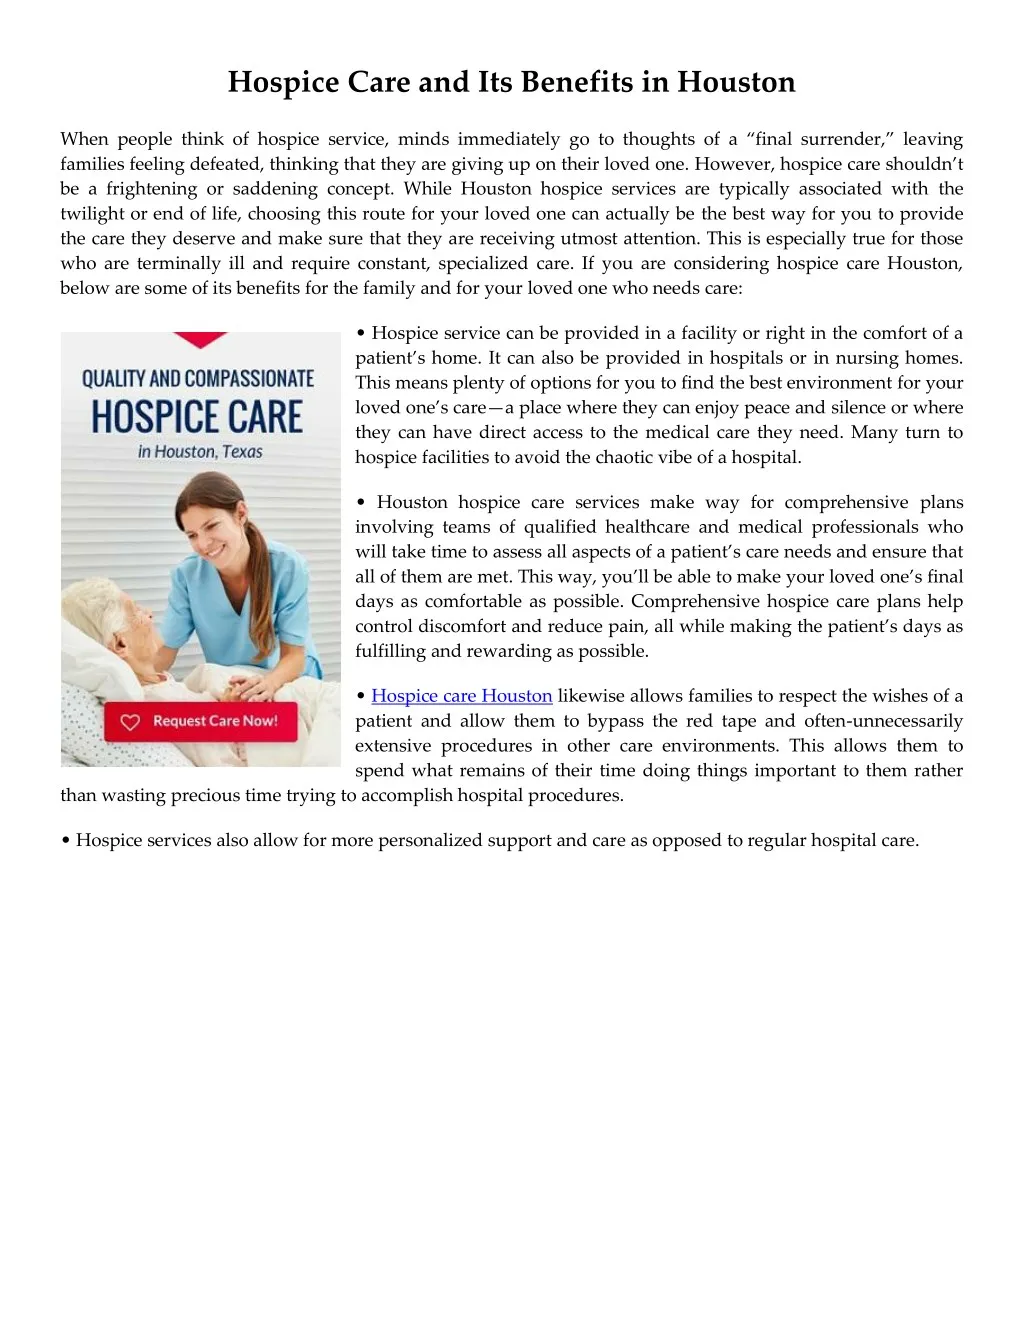 hospice care and its benefits in houston